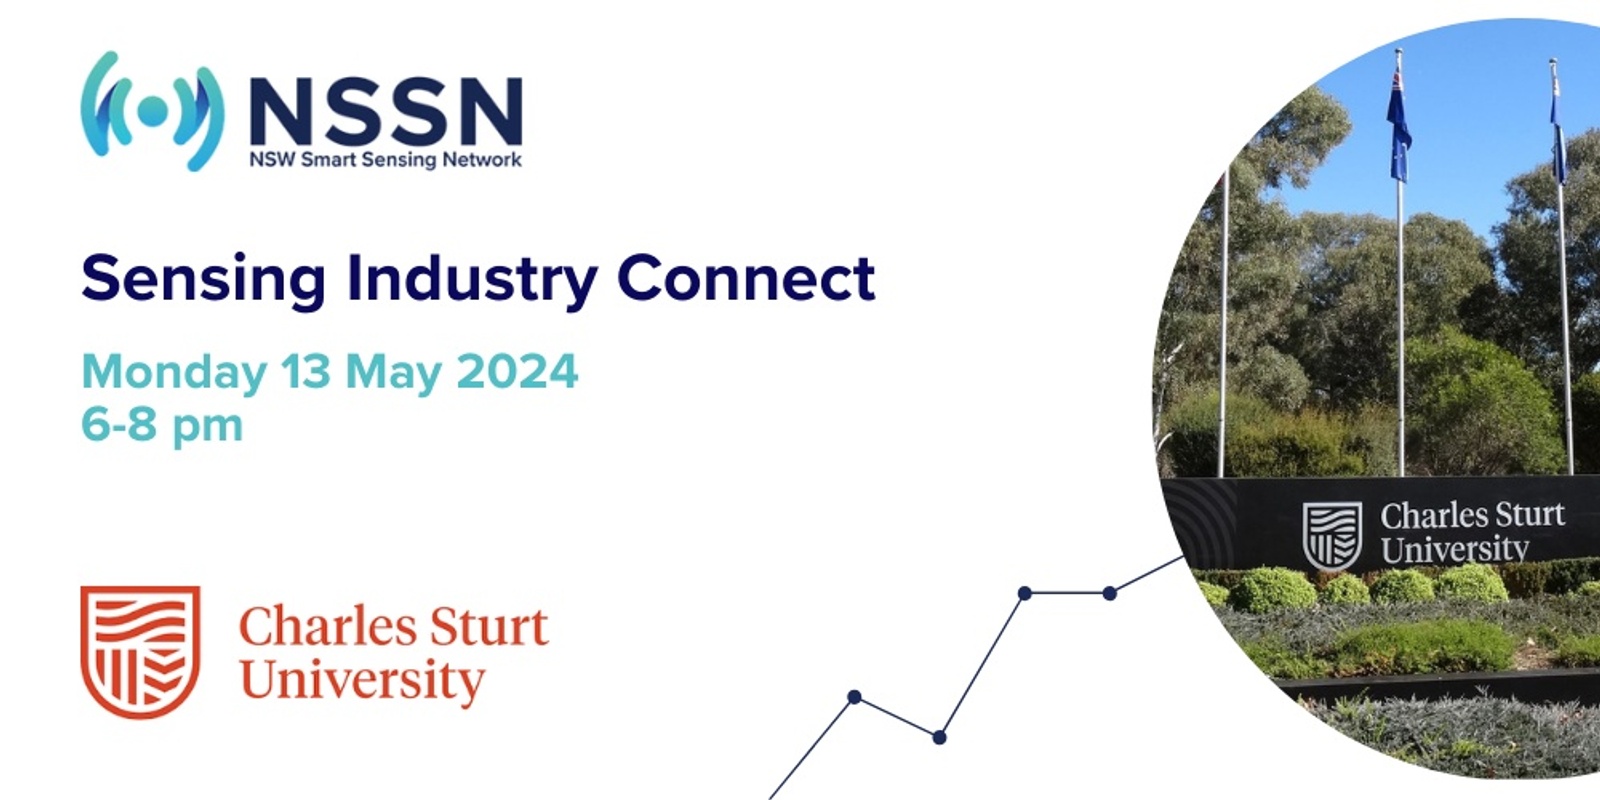 Banner image for NSSN Sensing Industry Connect